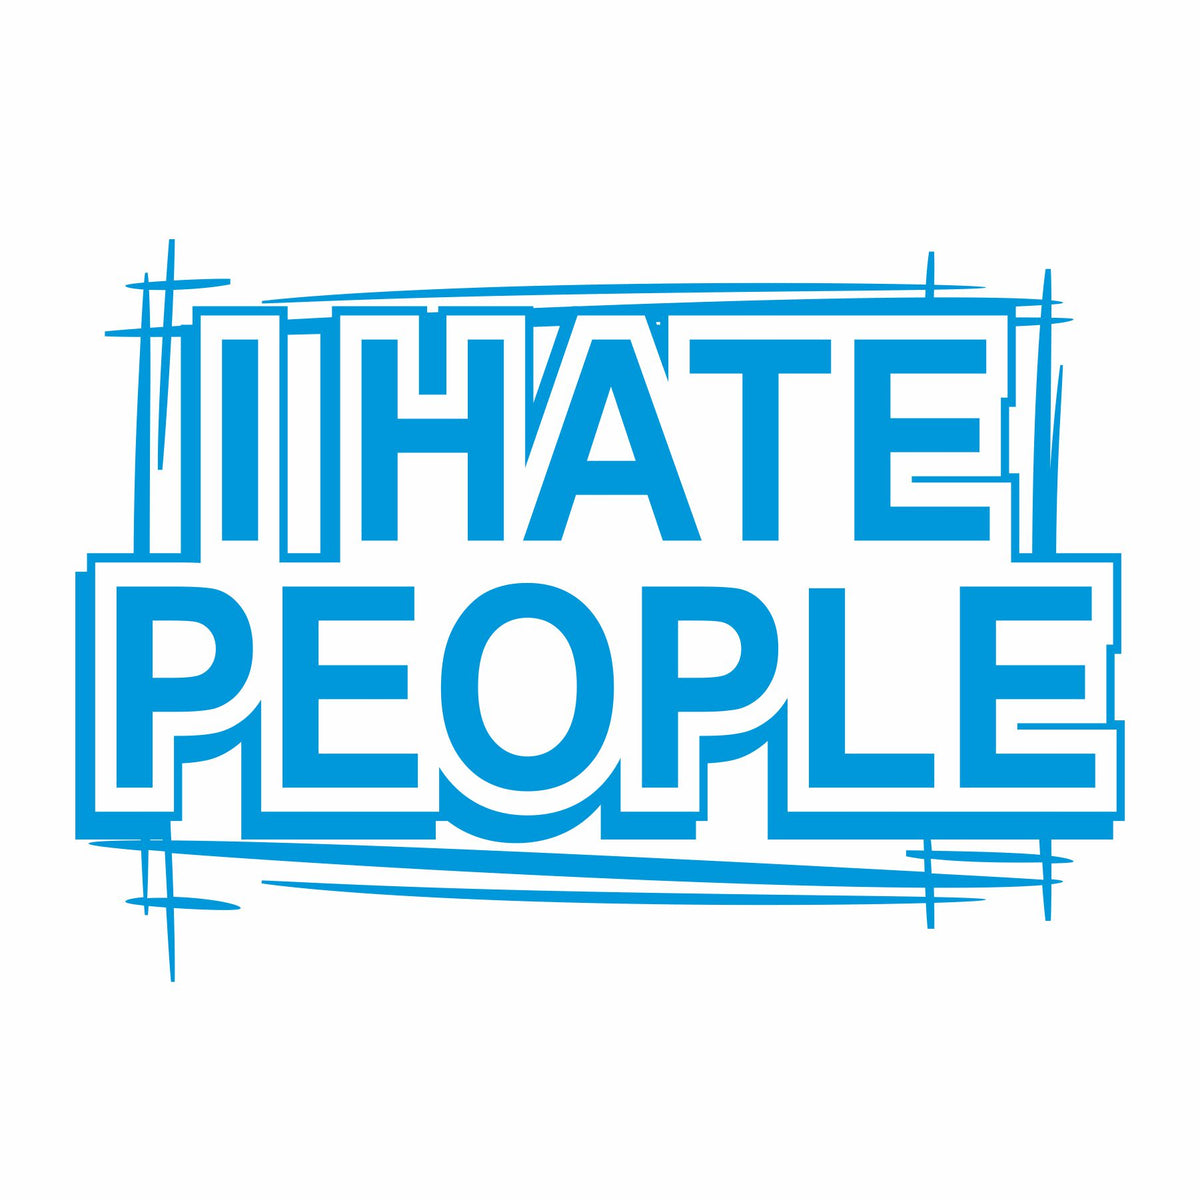 I Hate People Vinyl Decal - Free Shipping